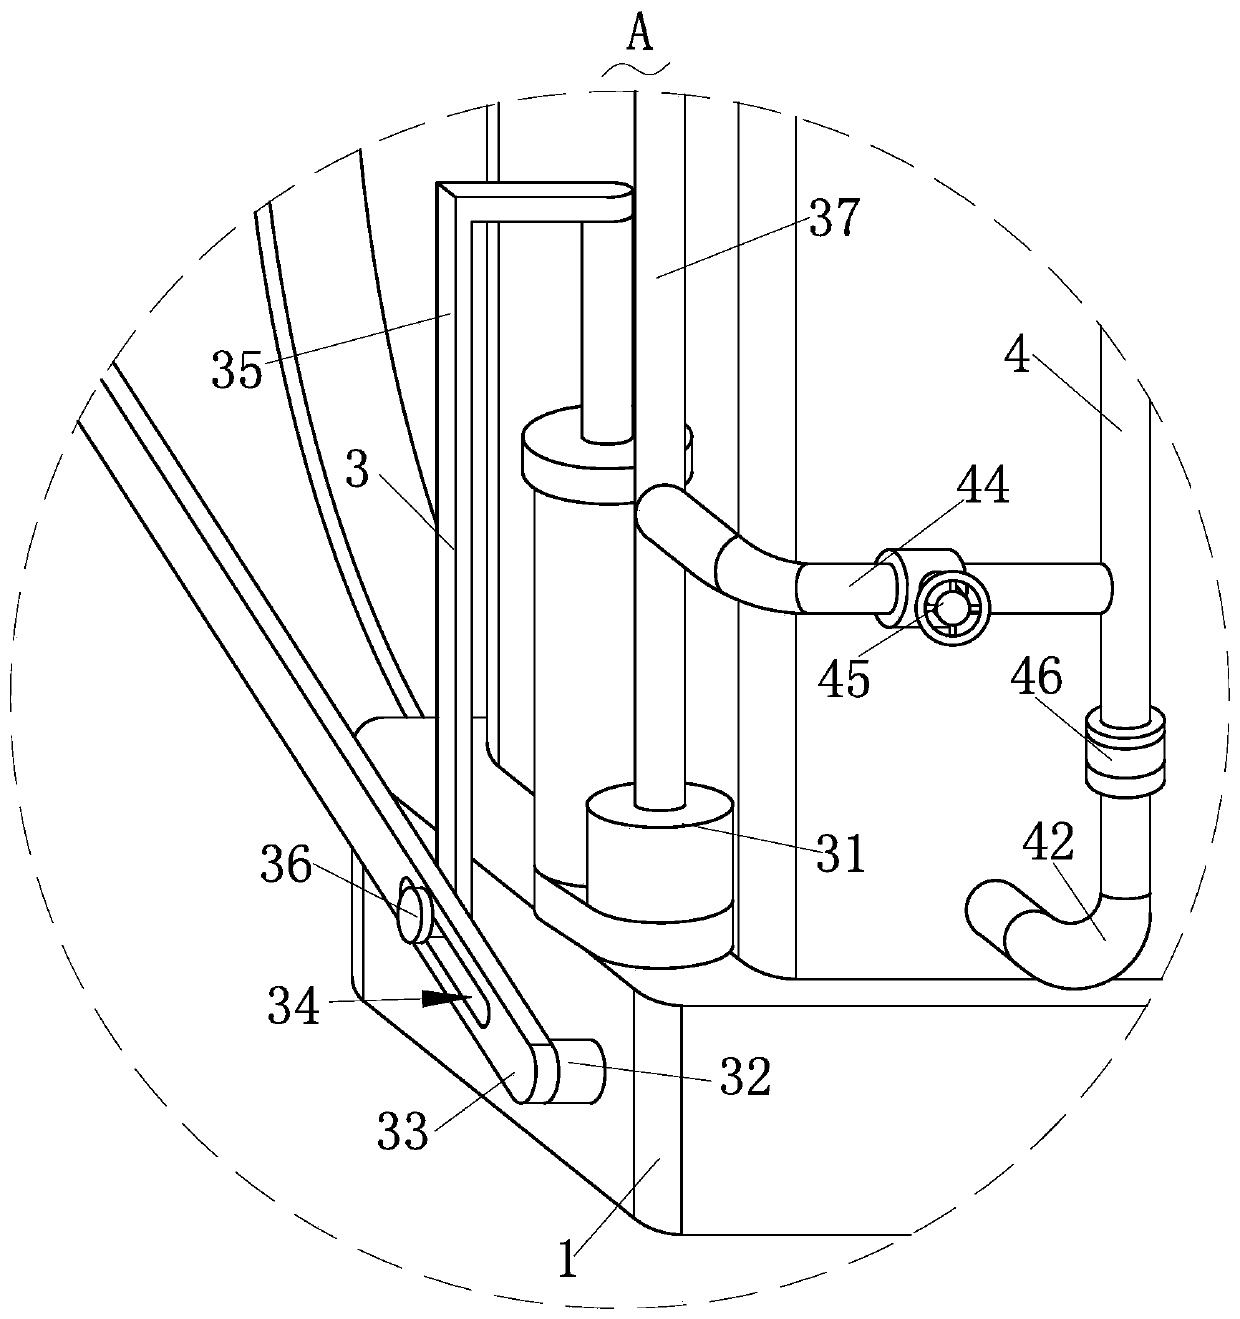 Pesticide spraying device with controllable dosage